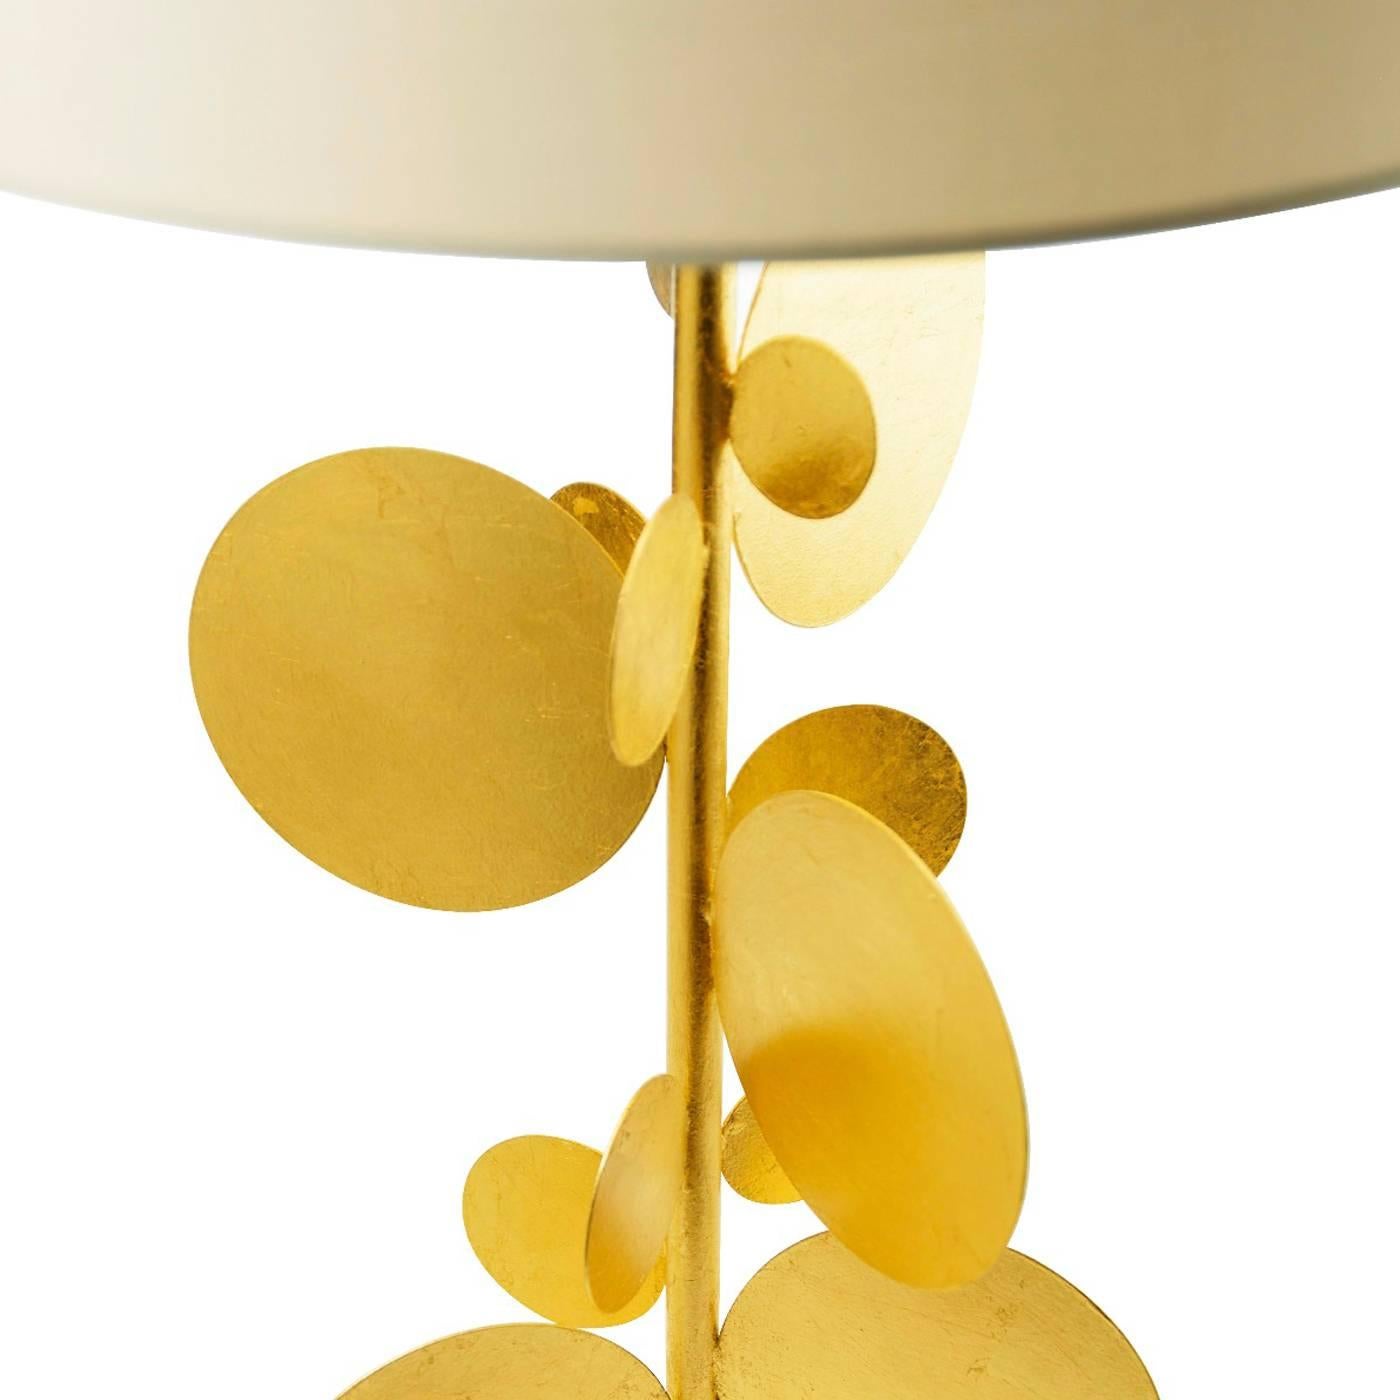 Stylish table lamp made of welded metal and available in two finishes, namely in gold or silver leaf, ancient or polished. Marioni recommends the cylindrical lampshade.